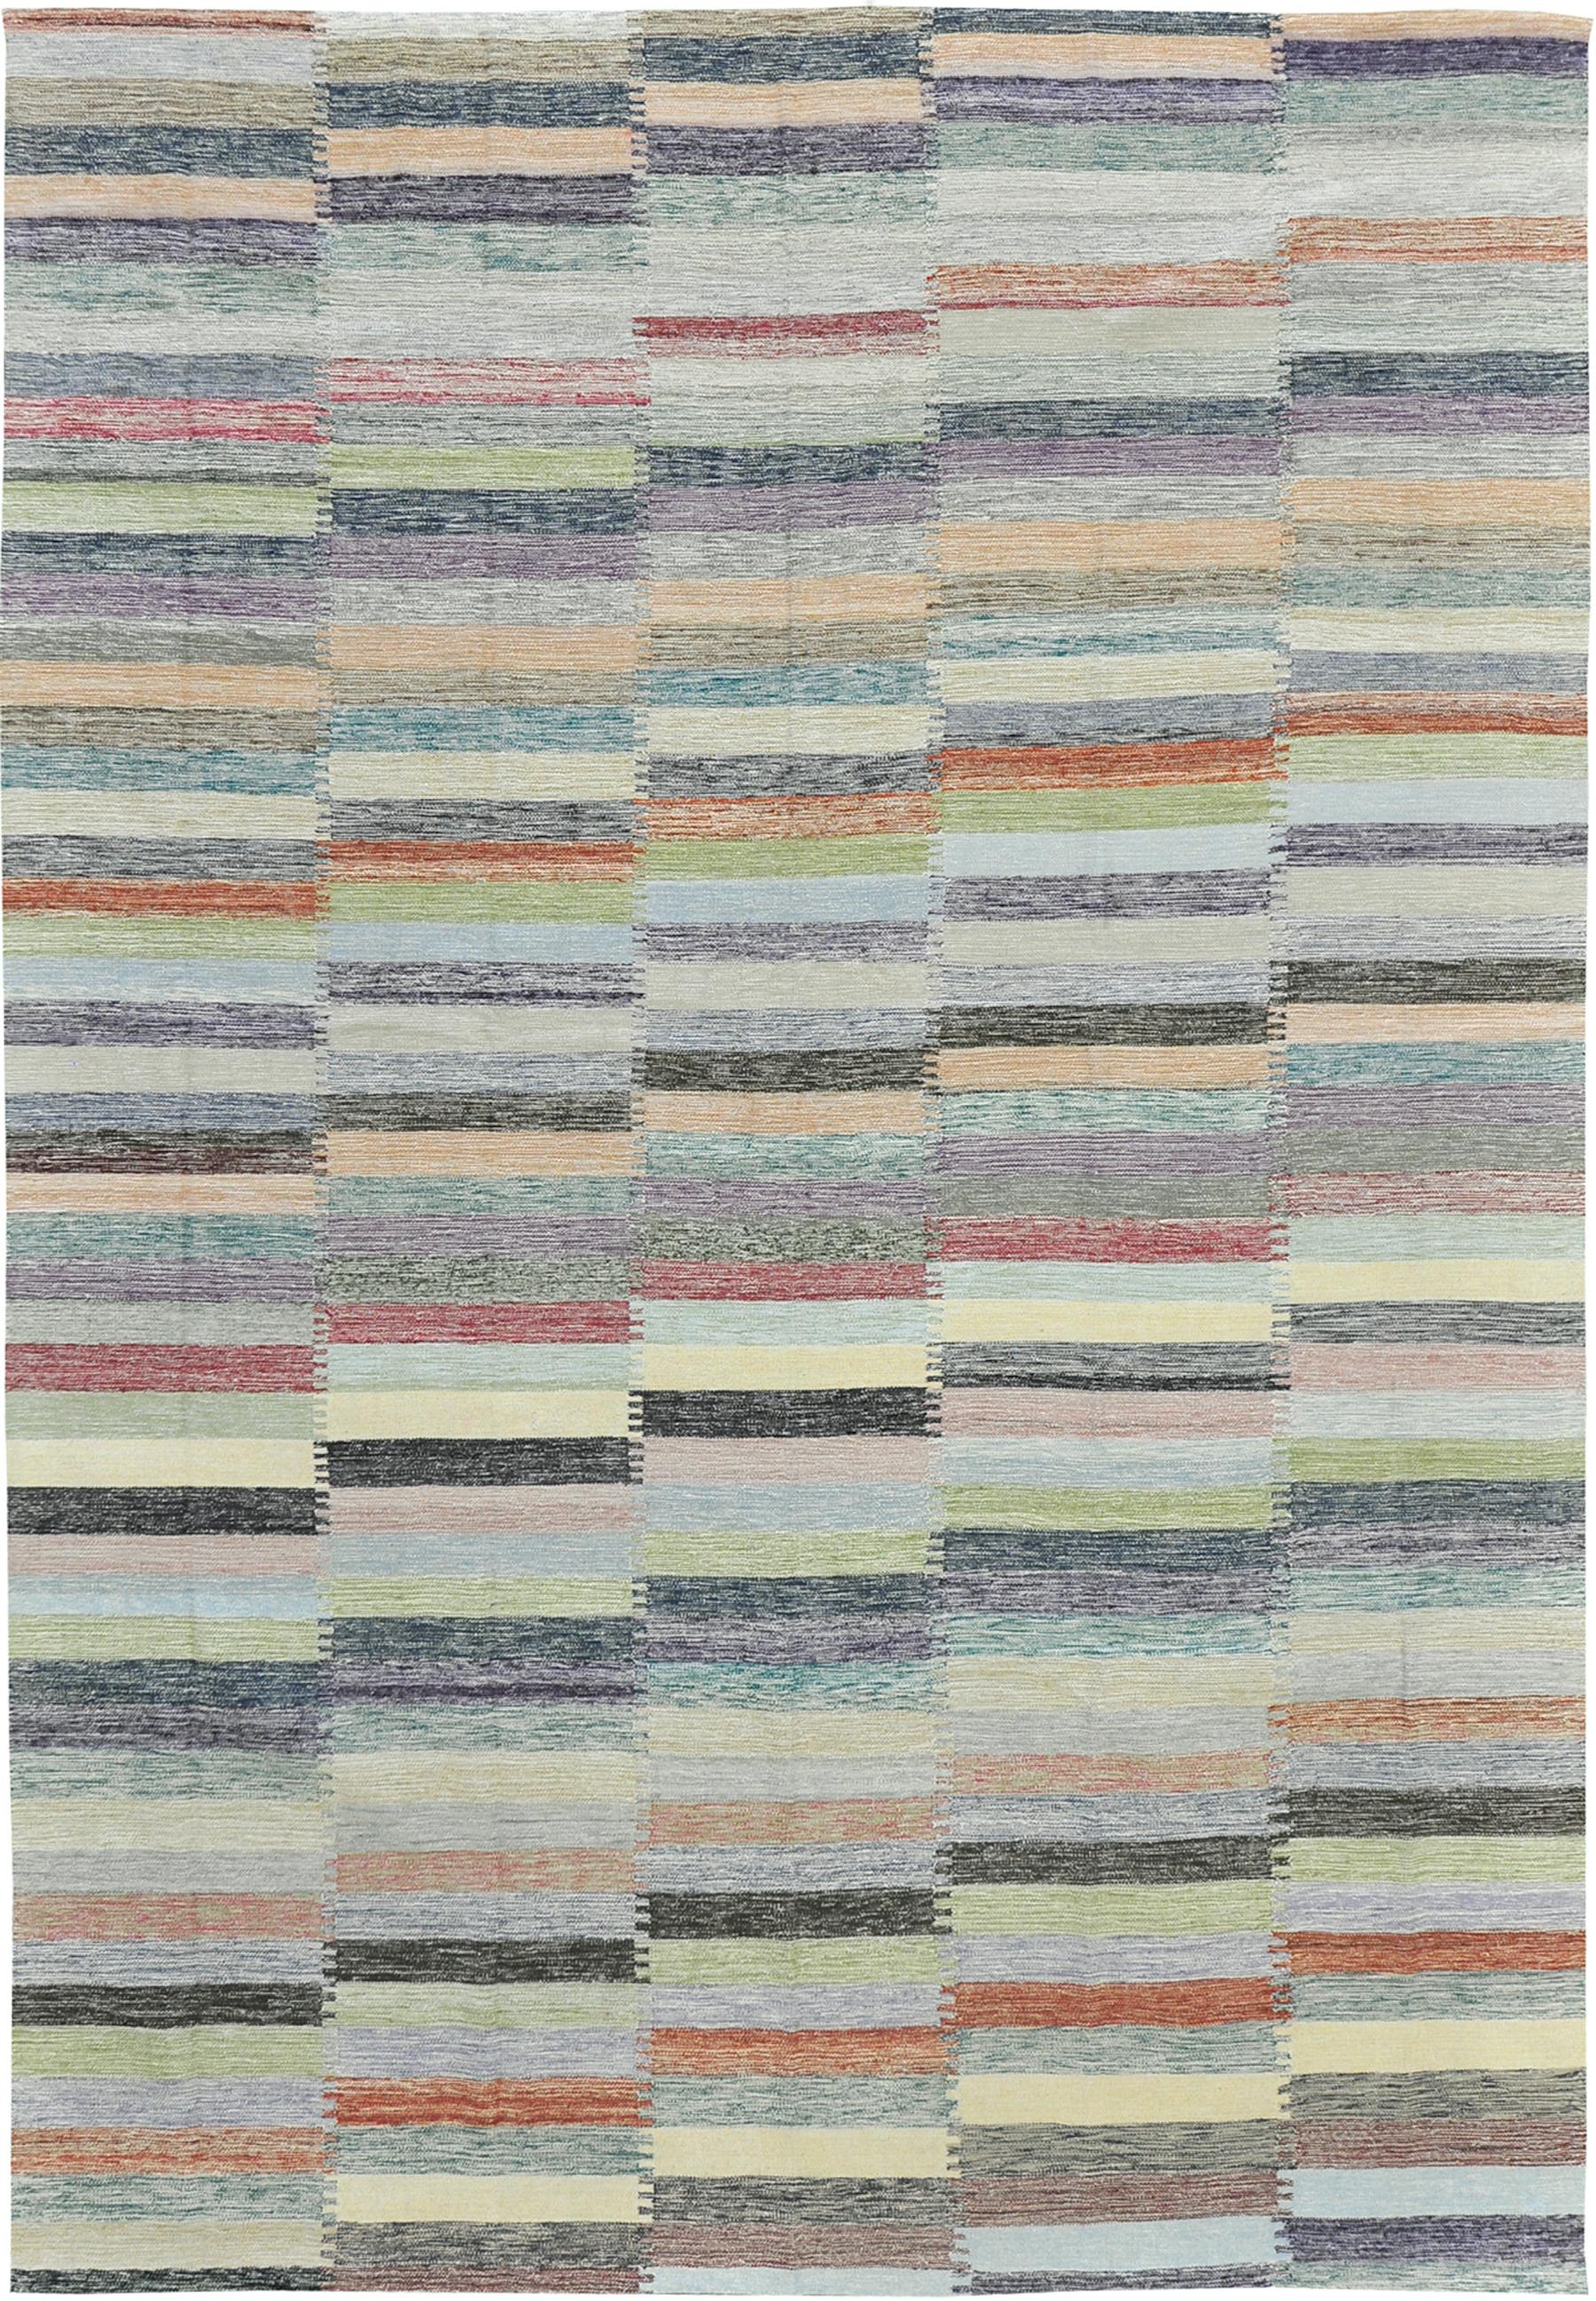 A colorful flat-weave Kilim from our Puro Collection. This multicolored design uses color blocking to create a rectangular brick-like effect. The Puro Collection features contemporary designs handmade by skilled artisans in Pakistan. This flat weave